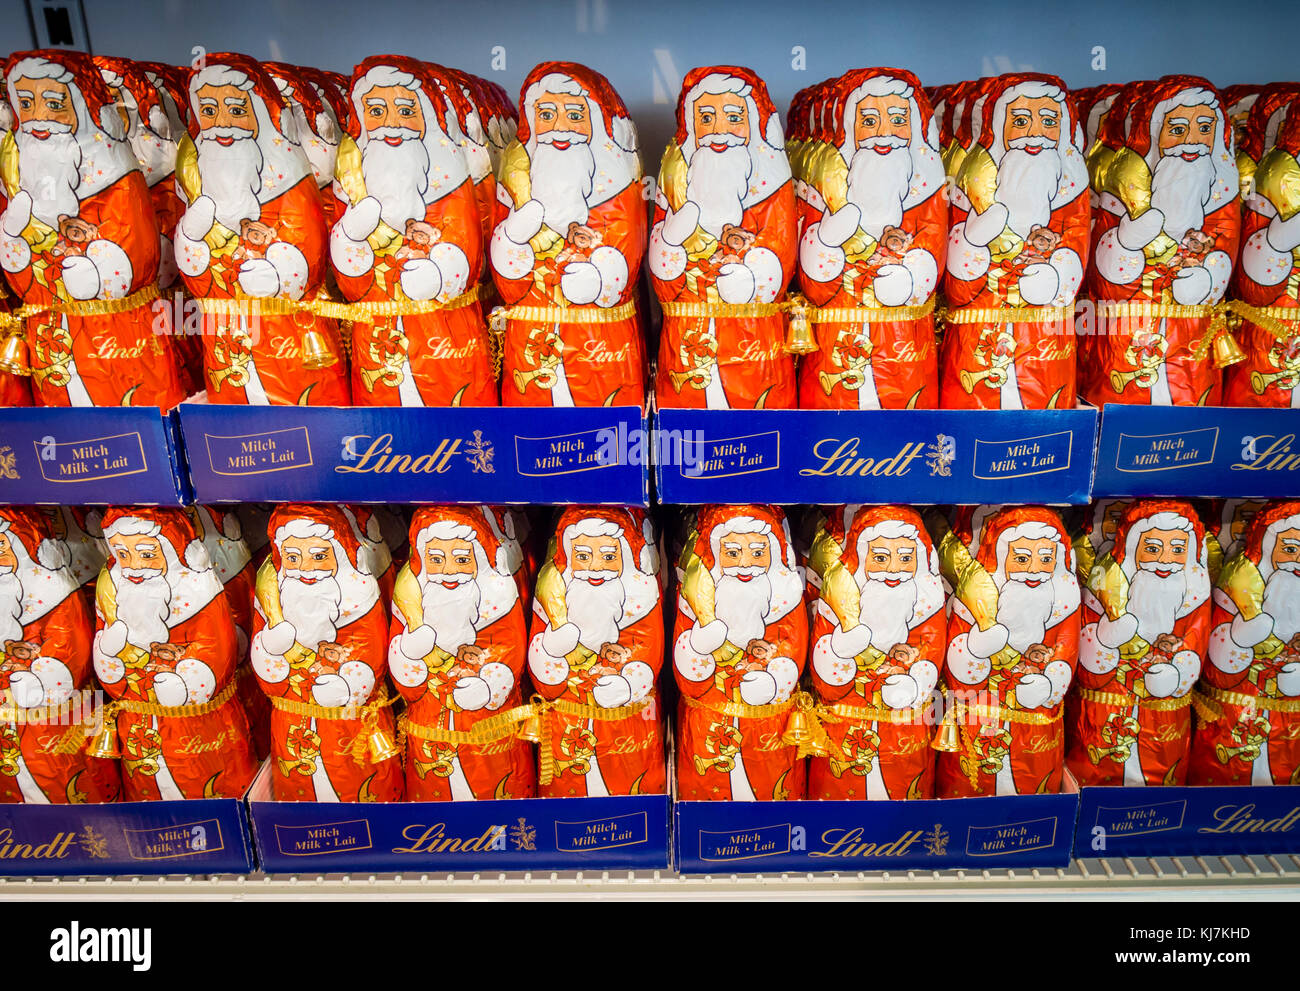 Zurich, Switzerland - 17 Nov 2017: Less than 6 weeks before Christmas, an army of chocolate Santa Clauses is lined up on a supermarket shelf. Stock Photo